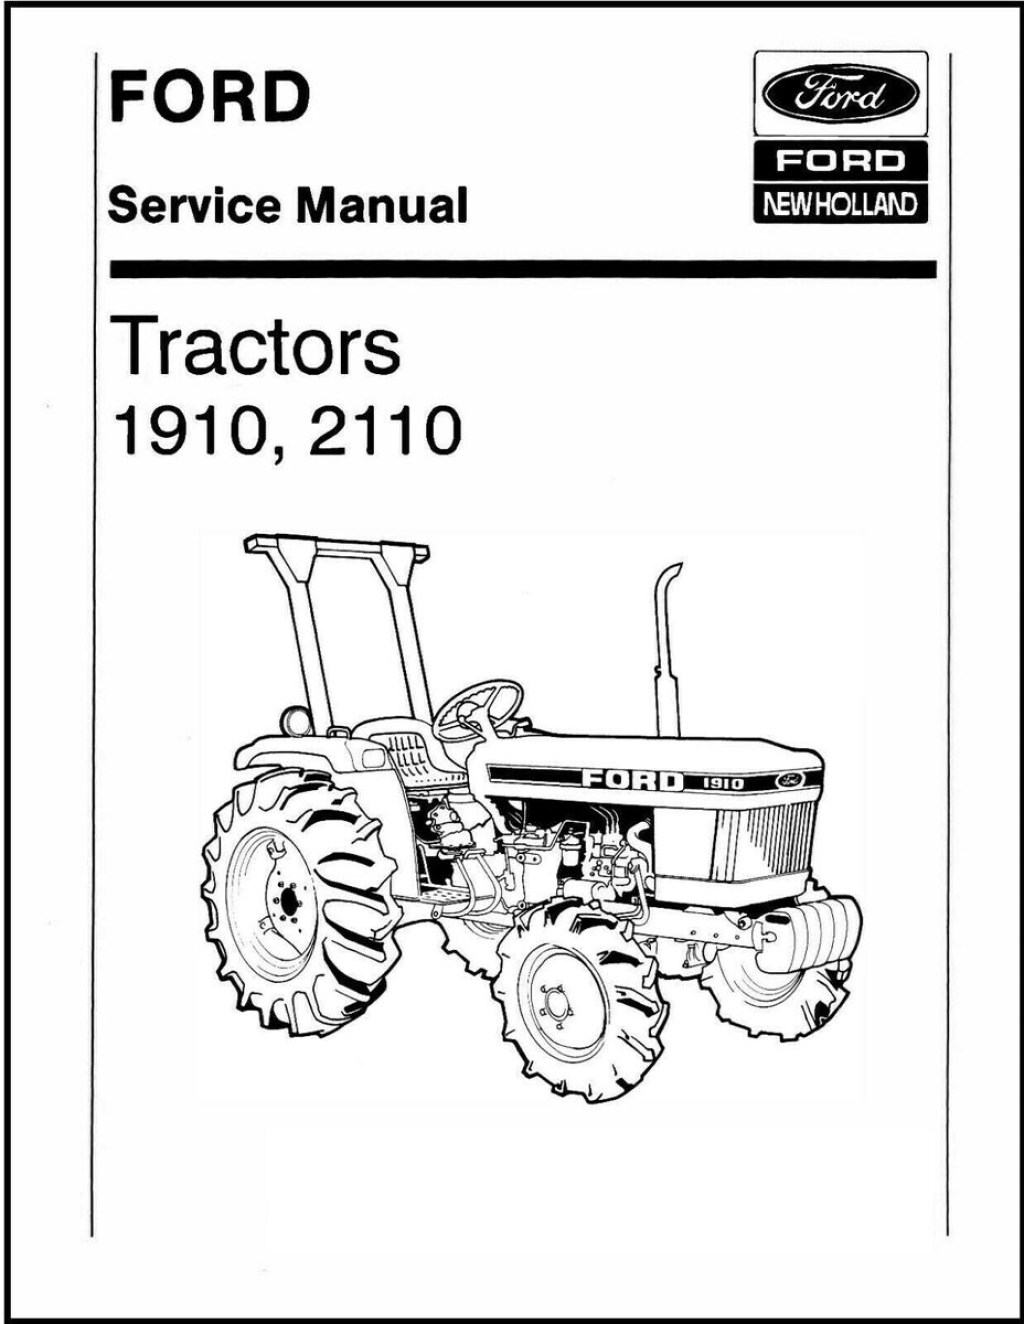 Picture of: TRACTORS SERVICE REPAIR SHOP TECHNICAL MANUAL FORD    COMPACT